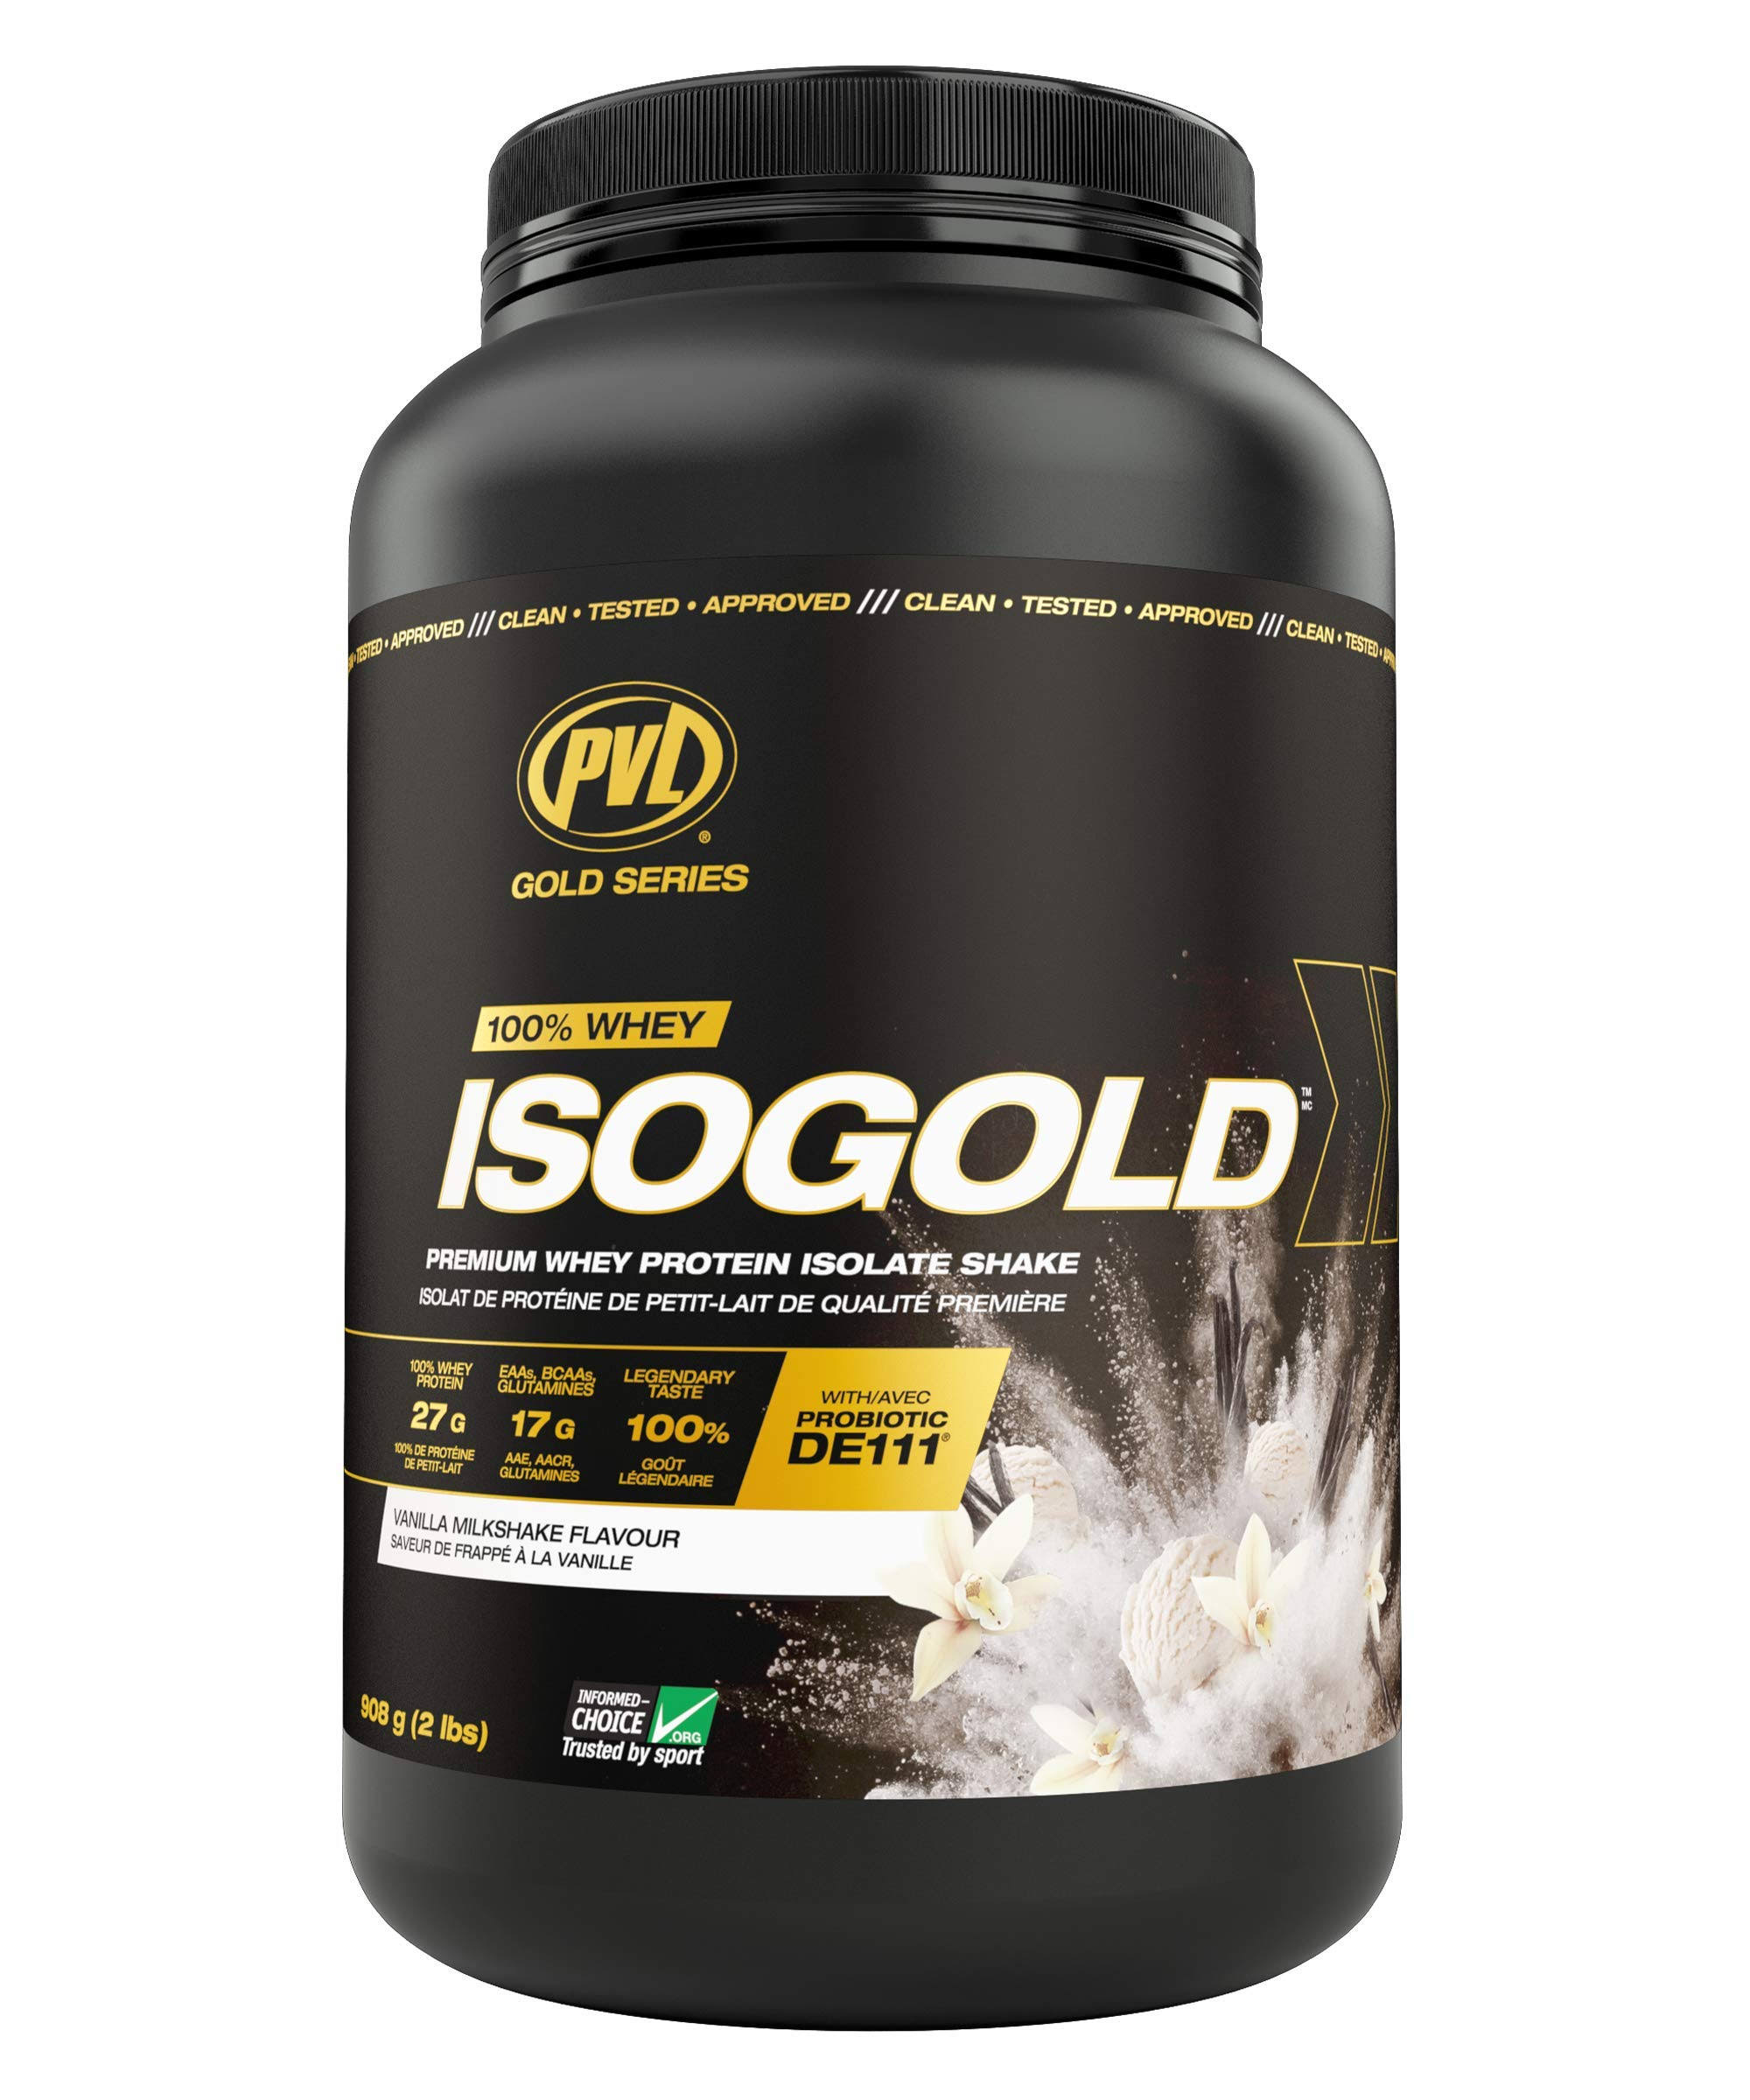 PVL Iso-gold Extra Premium Whey Protein Isolate - 900g